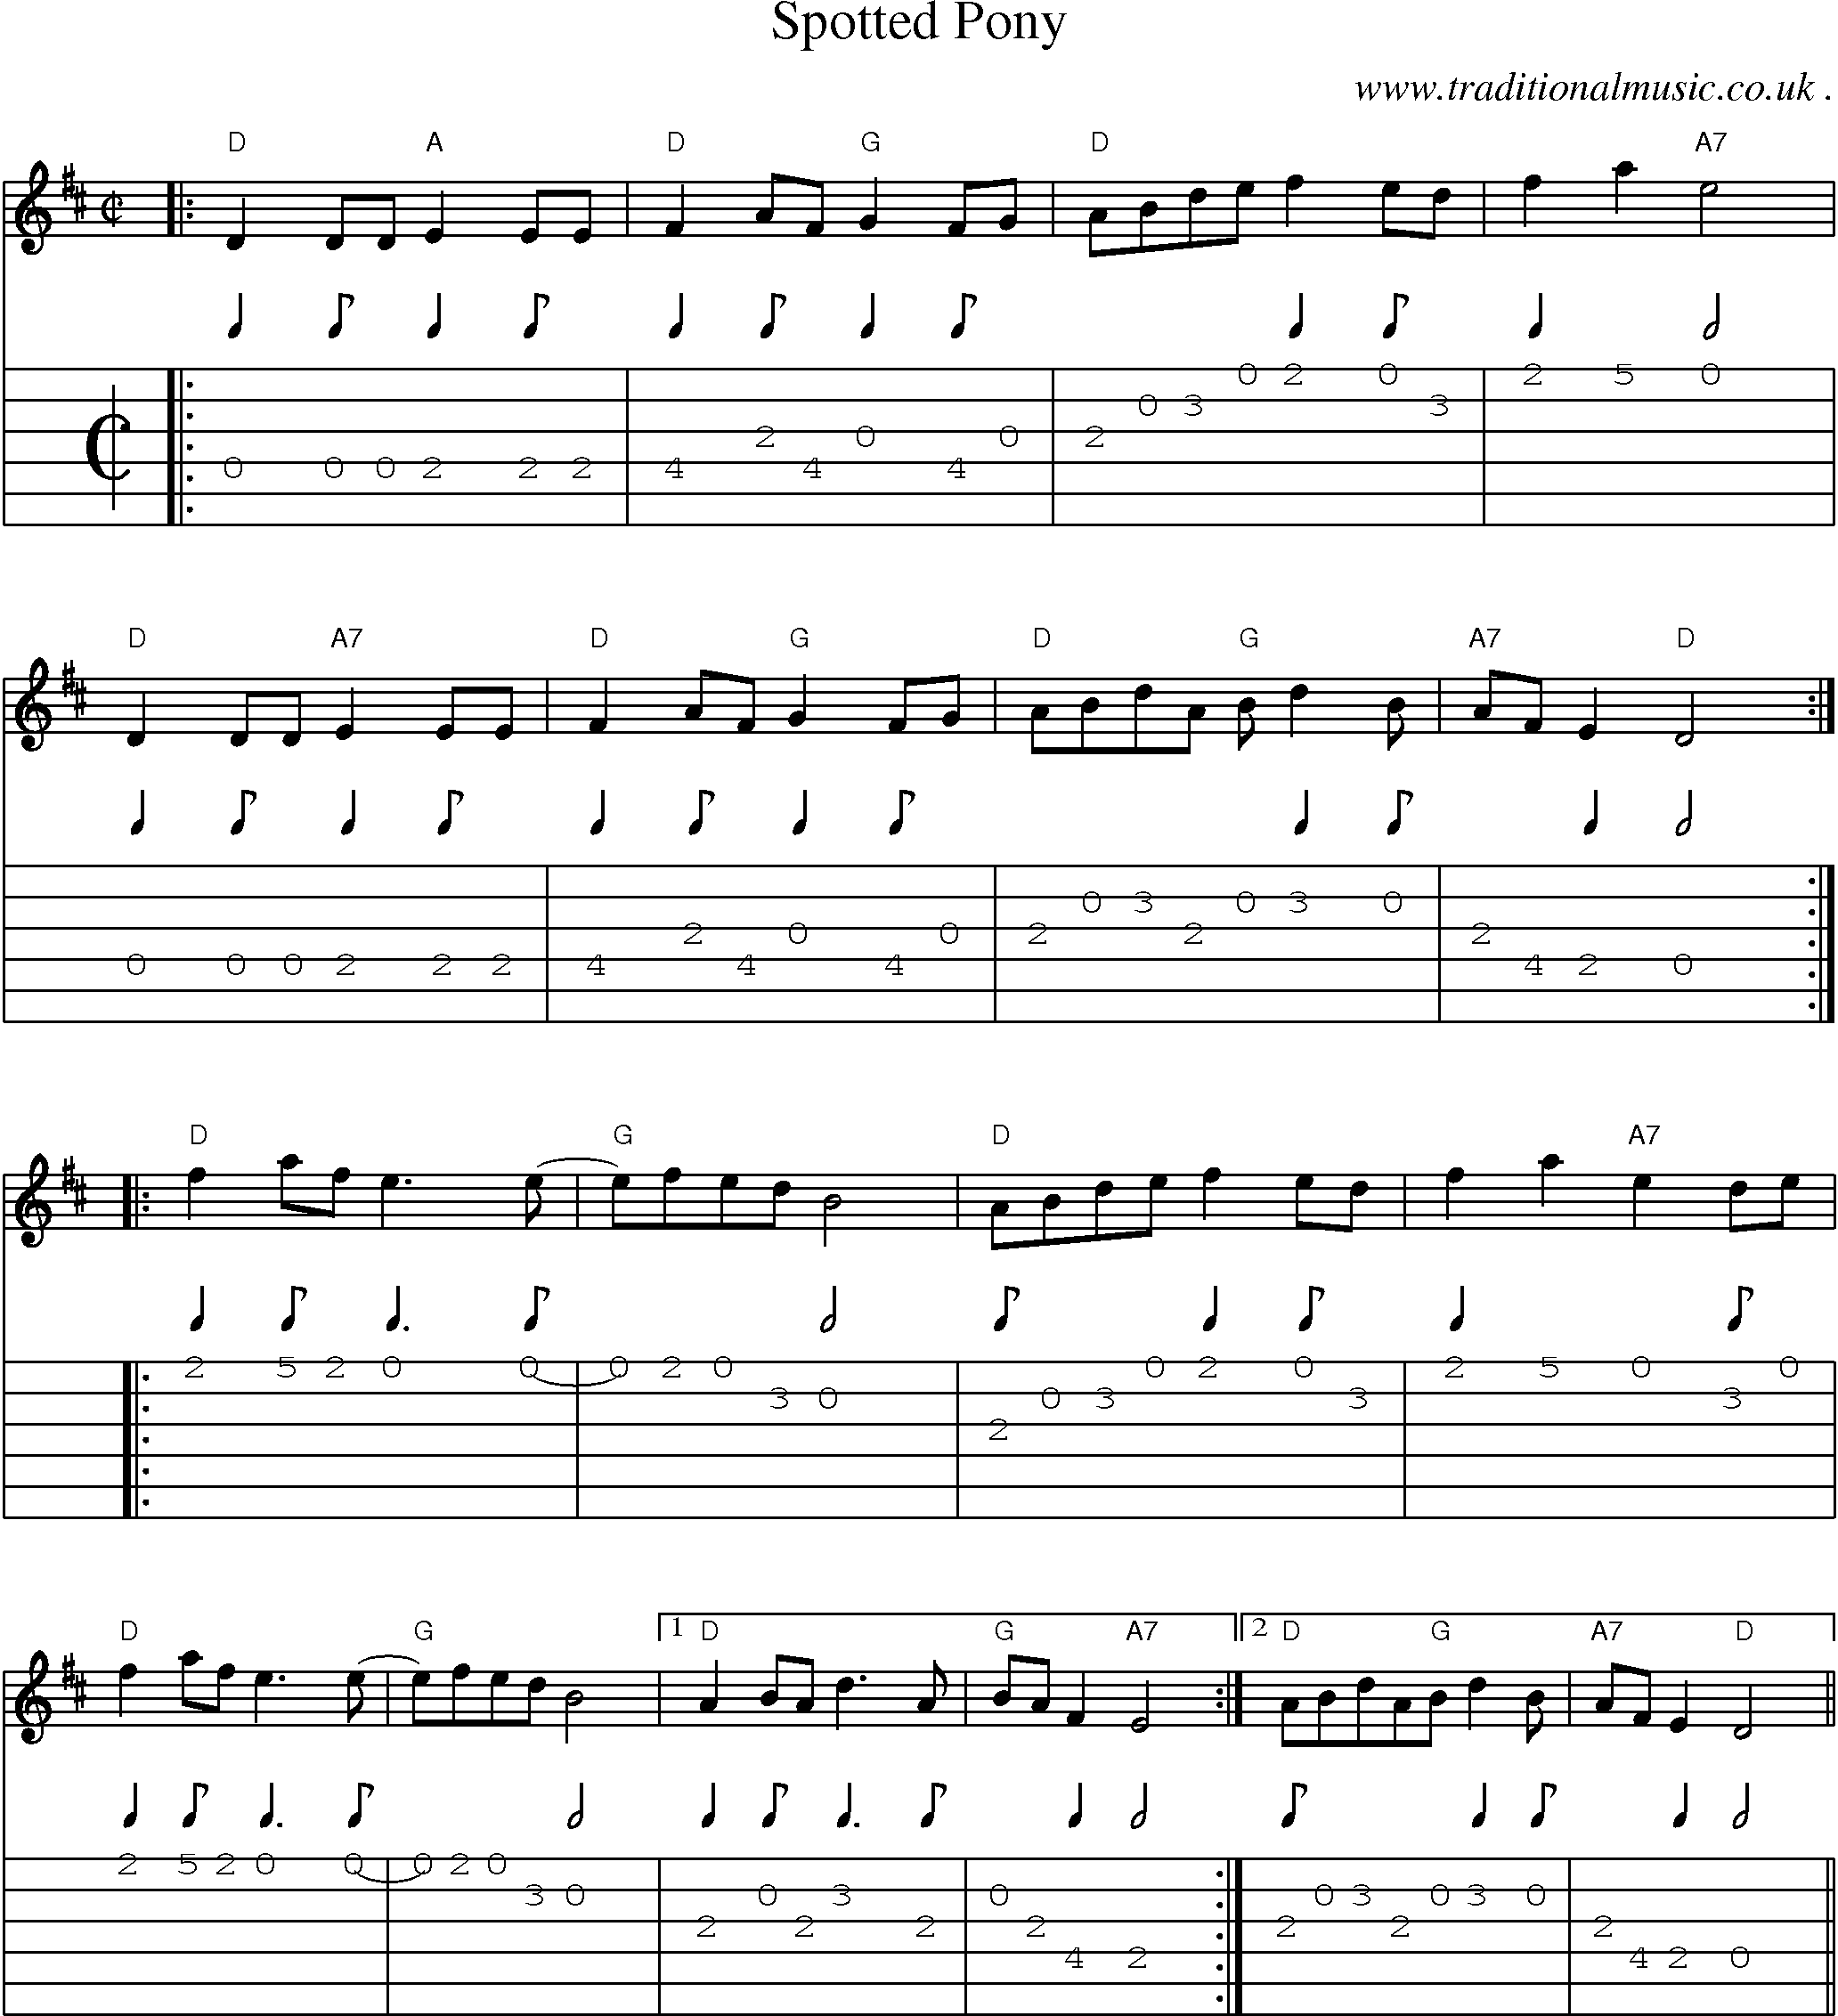 Music Score and Guitar Tabs for Spotted Pony